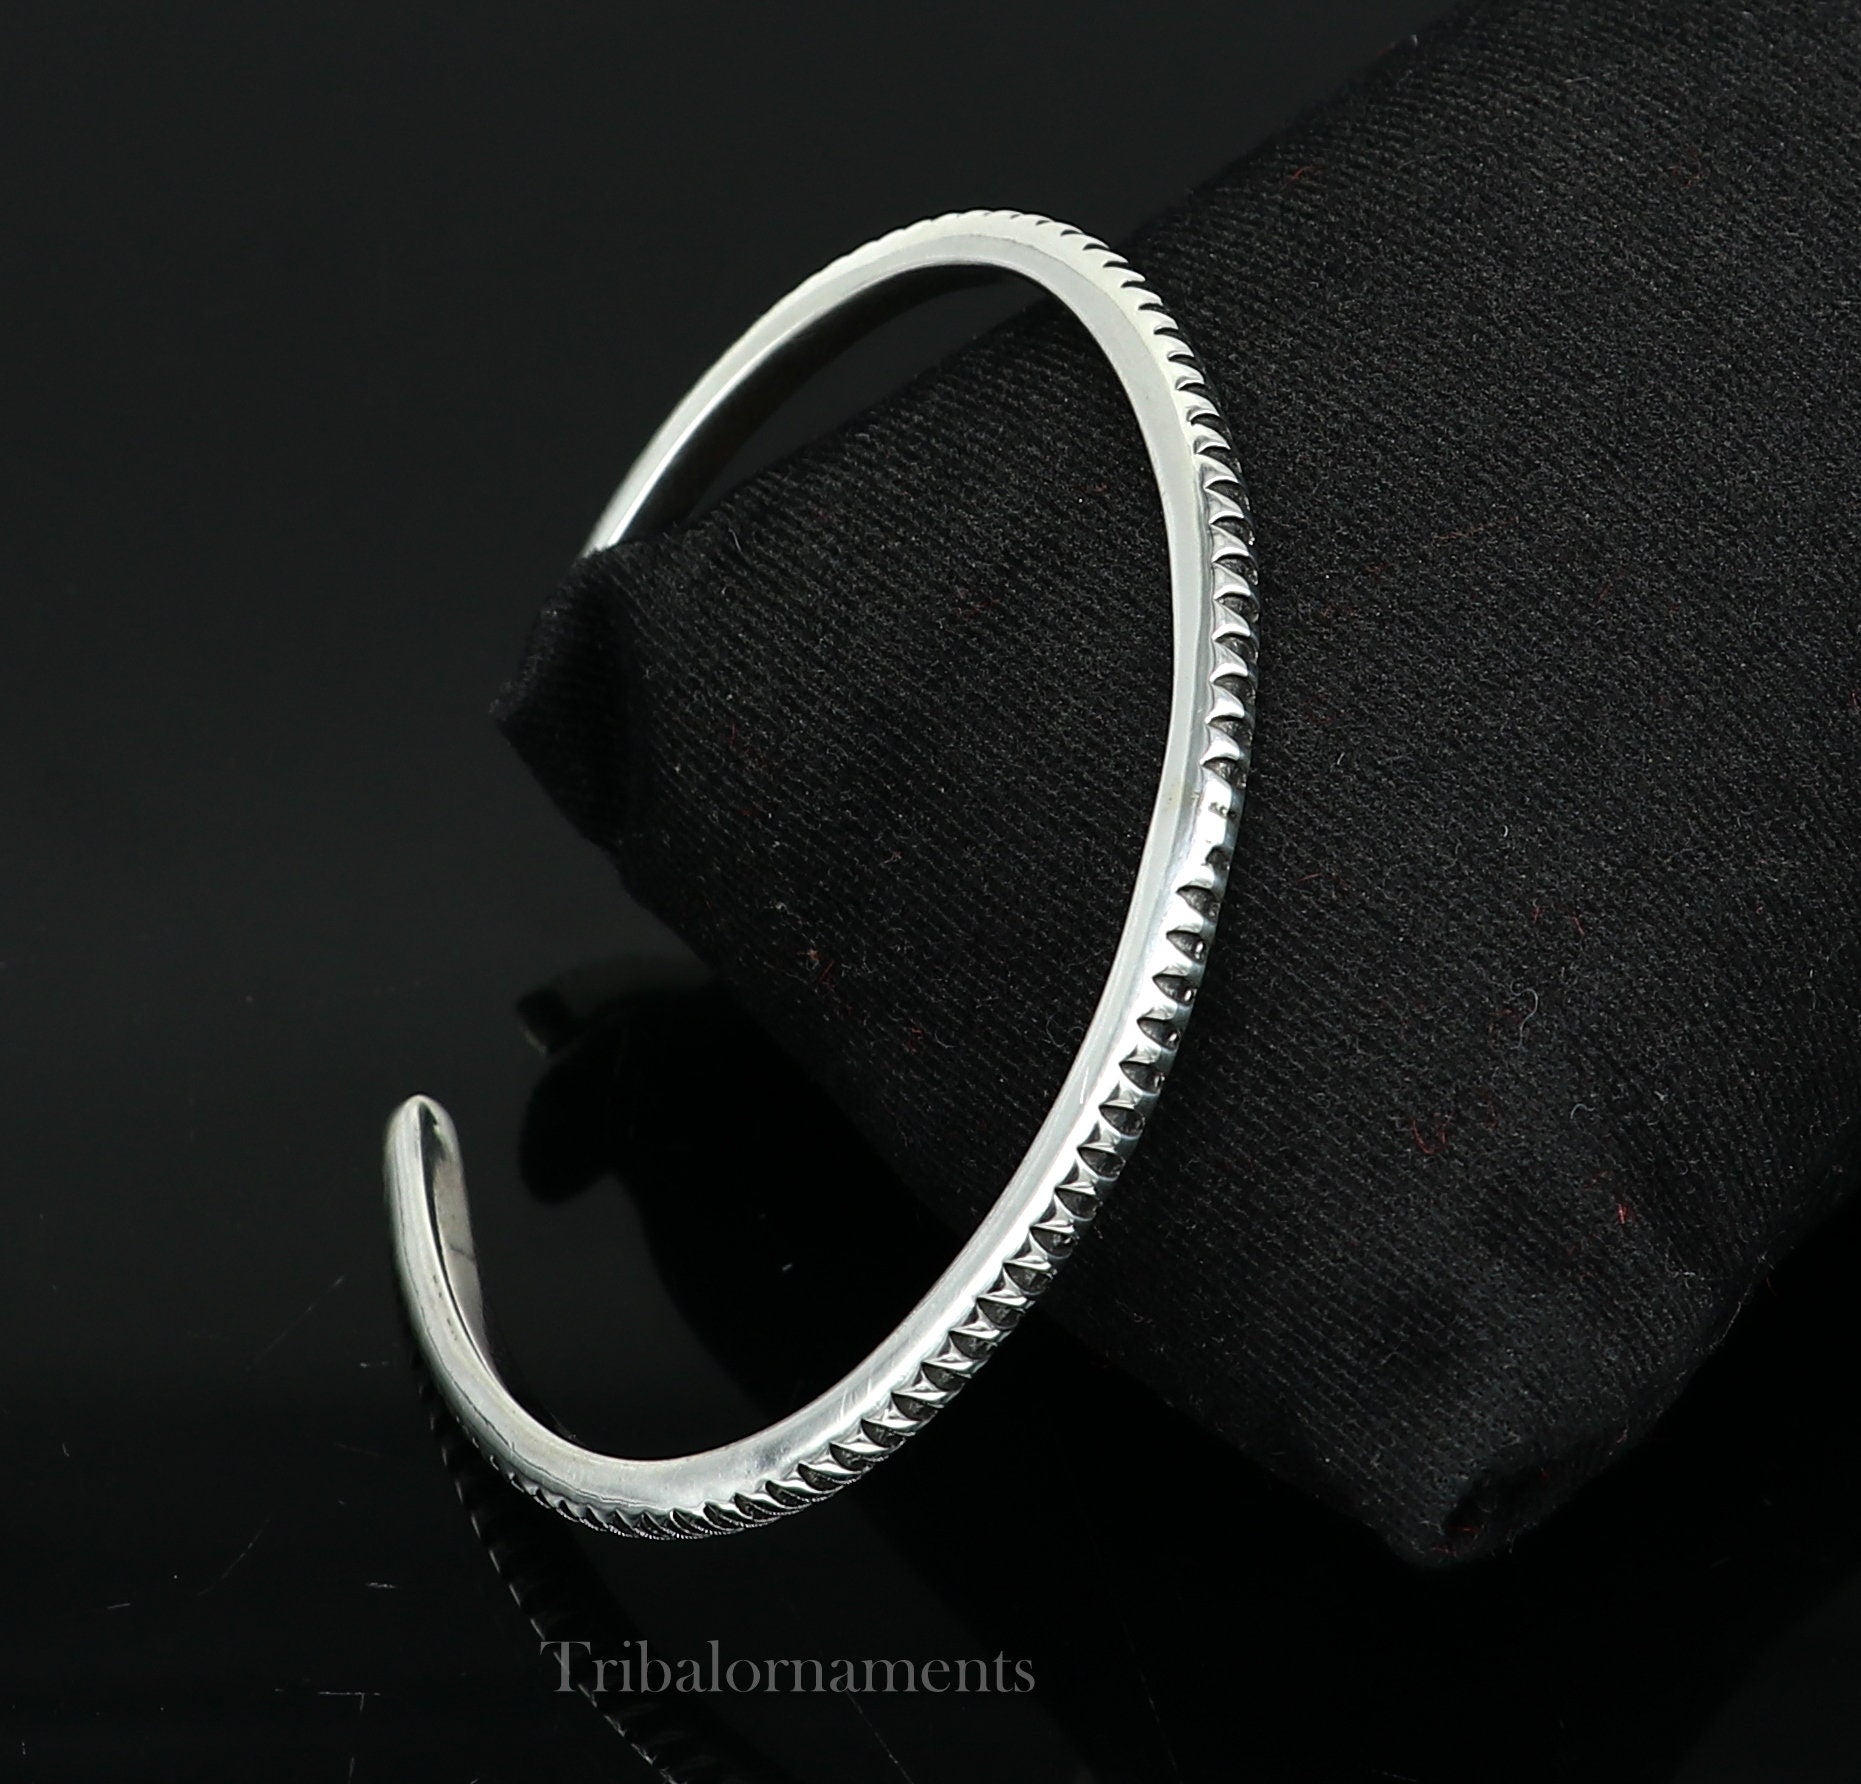 solid 925 sterling silver handmade adjustable cuff bangle bracelet unsex gifting jewelry, best gift cuff bracelet from india nsk375 - TRIBAL ORNAMENTS